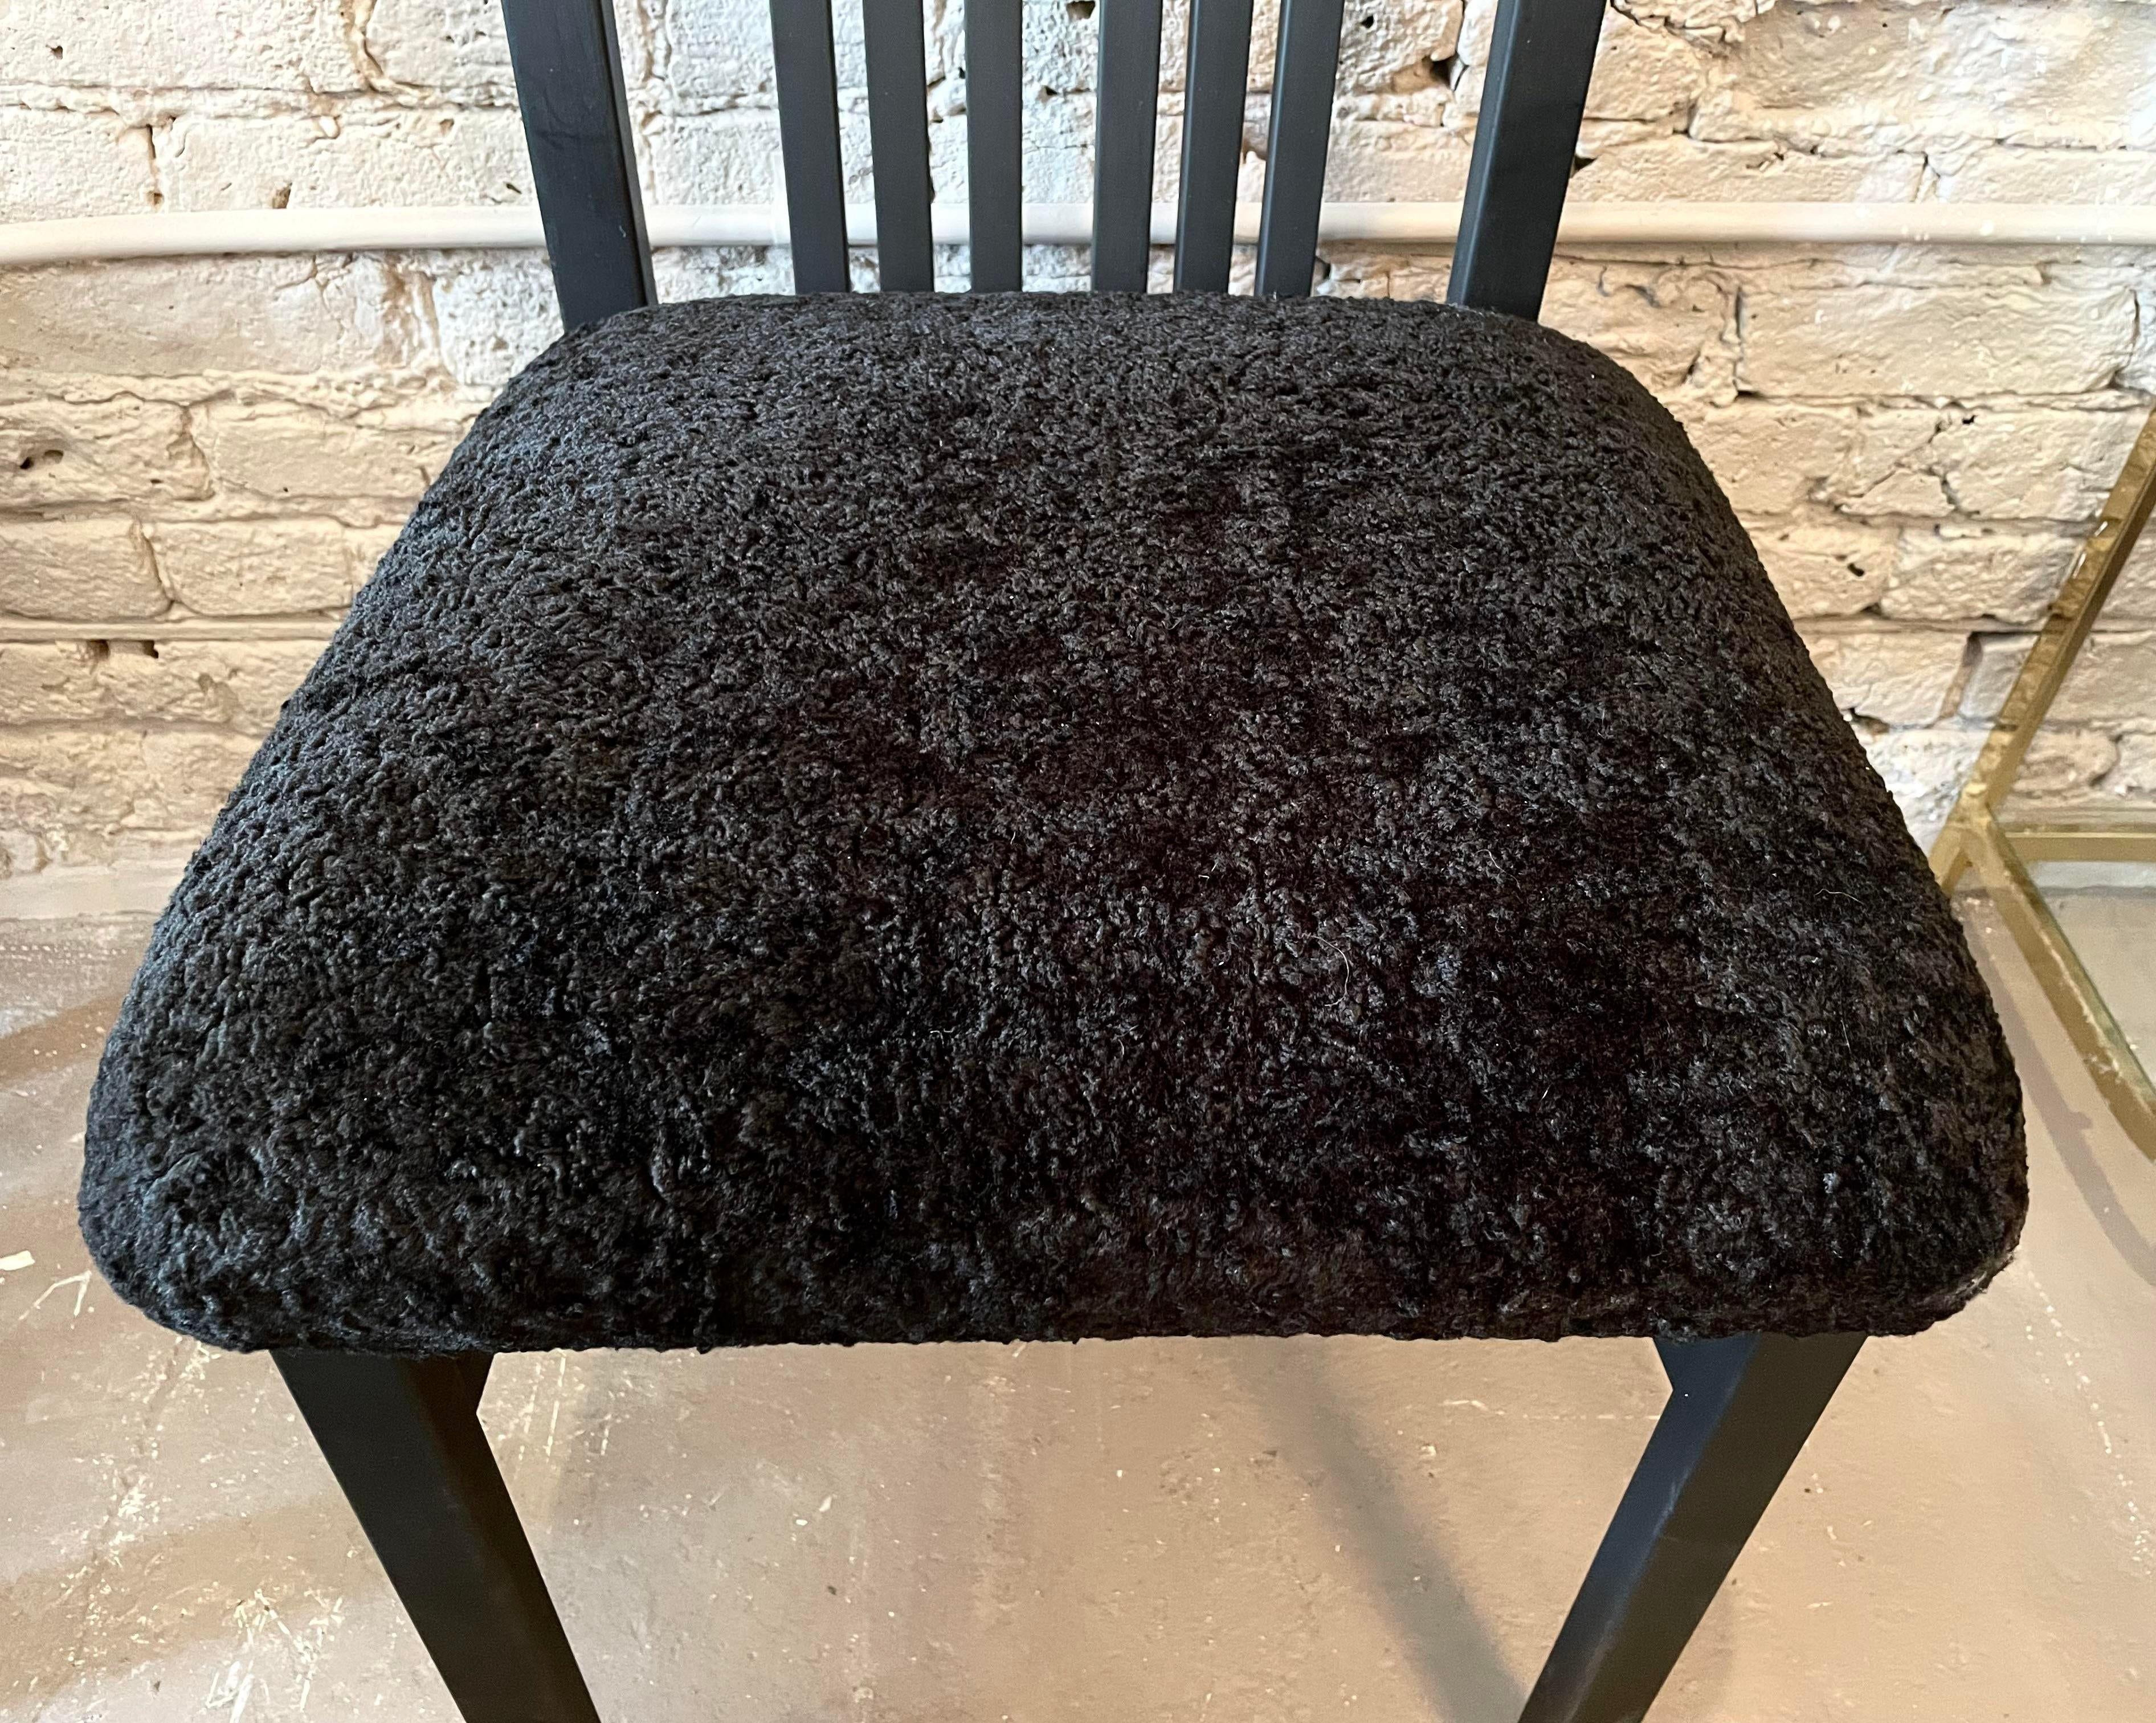 Gorgeous and completely restored dining chairs. We painted the wood with a fresh coat of soft black paint and fluffed up the seat cushions with black faux Persian lamb upholstery.